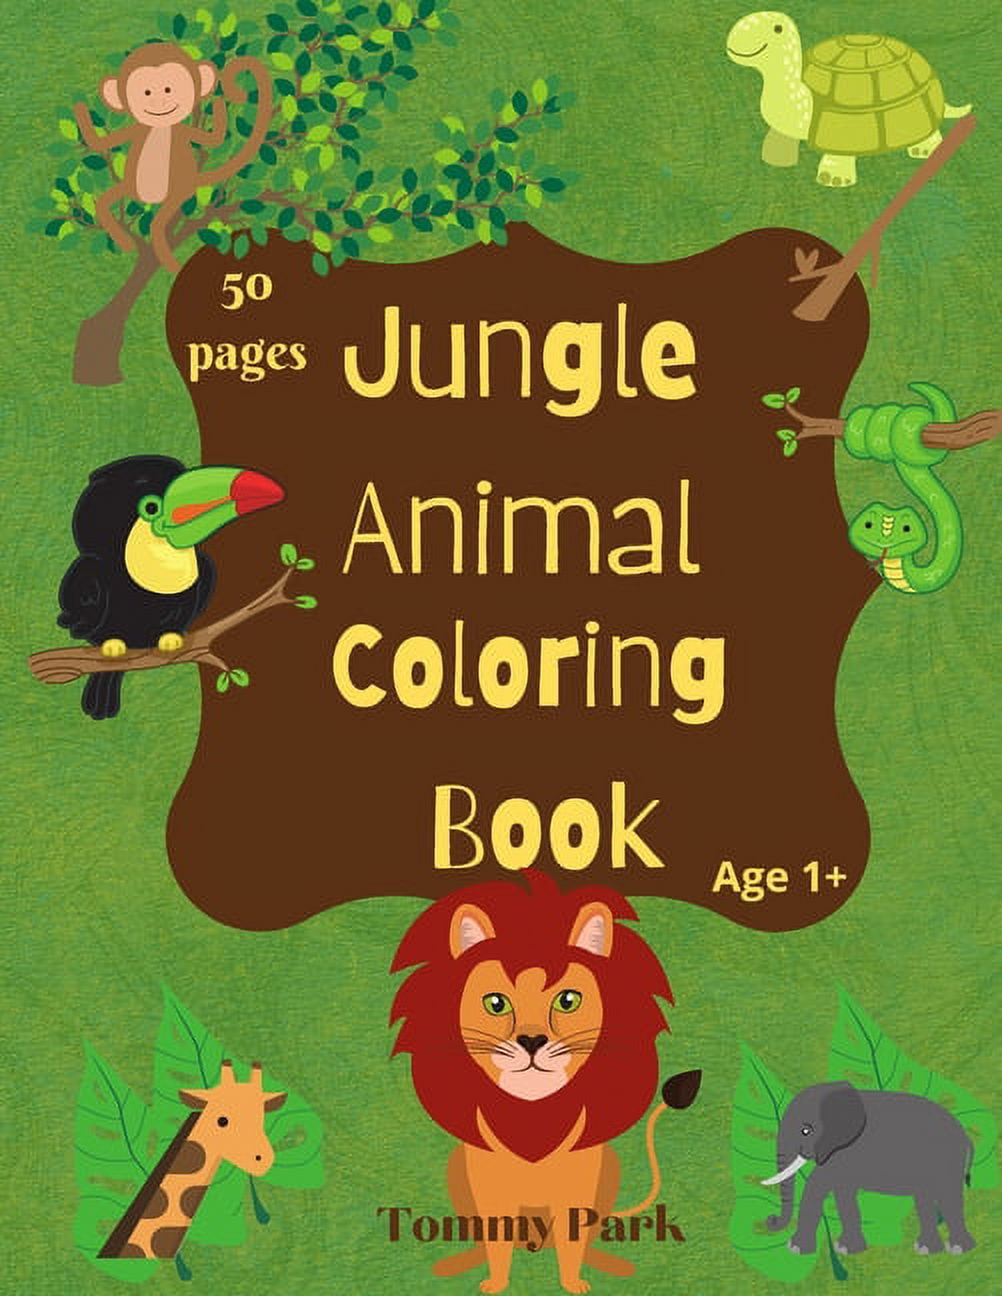 My first coloring book: Cute, Unique Coloring Pages - kids